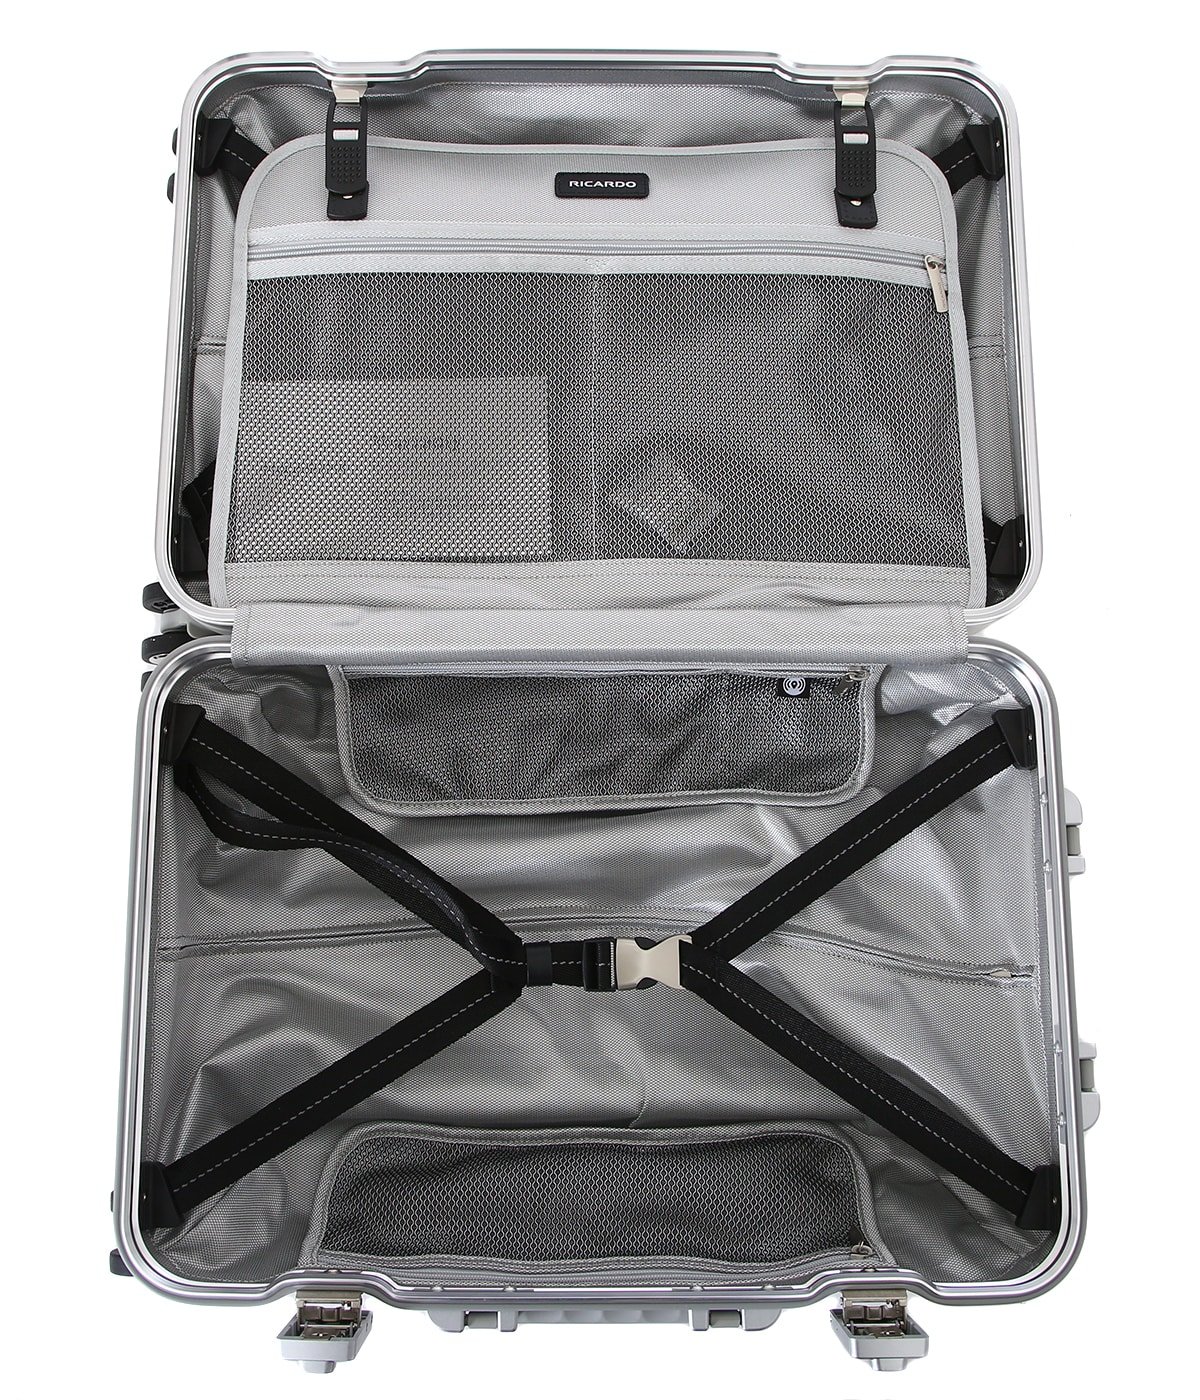 Aileron 20-inch Spinner Suitcase